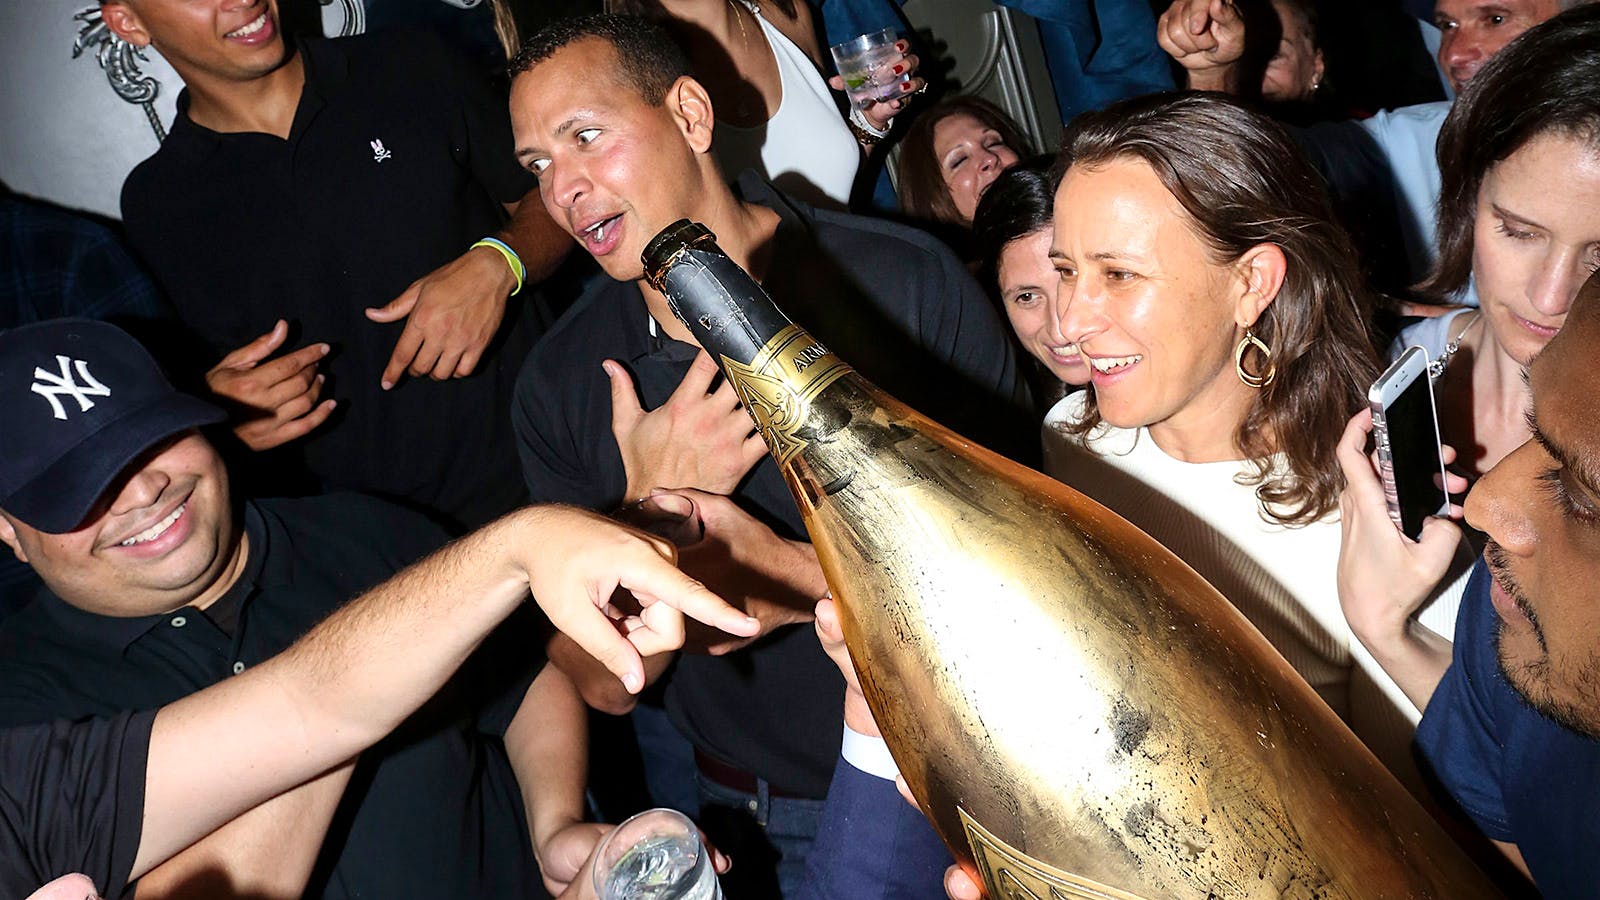 Unfiltered: A-Rod Retires with Giant Bottle of Jay Z's Champagne